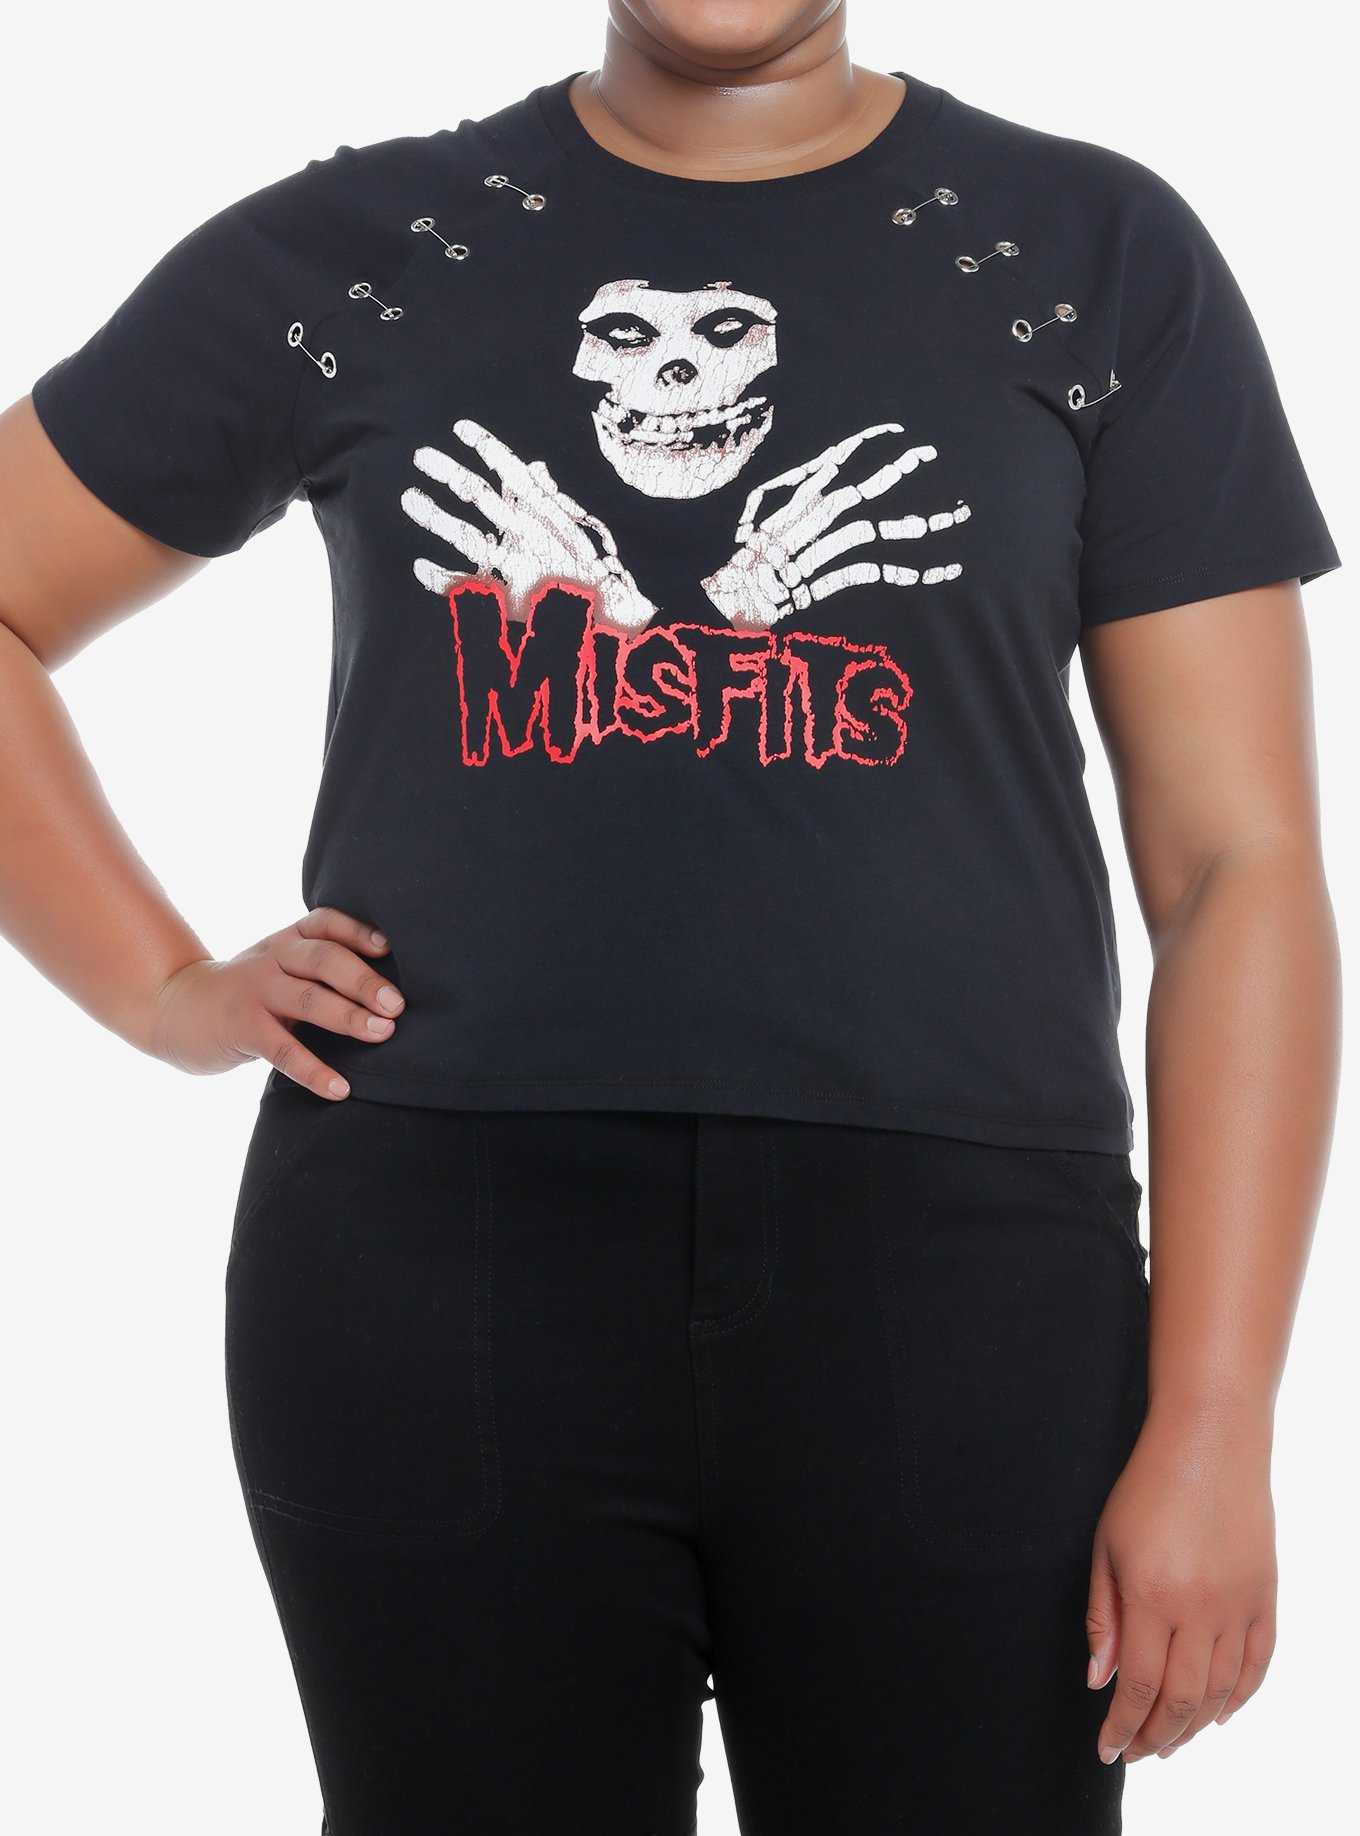 Misfits X Social Collision Fiend Safety Pin Girls Raglan T-Shirt Plus Size Hot Topic Exclusive, , hi-res